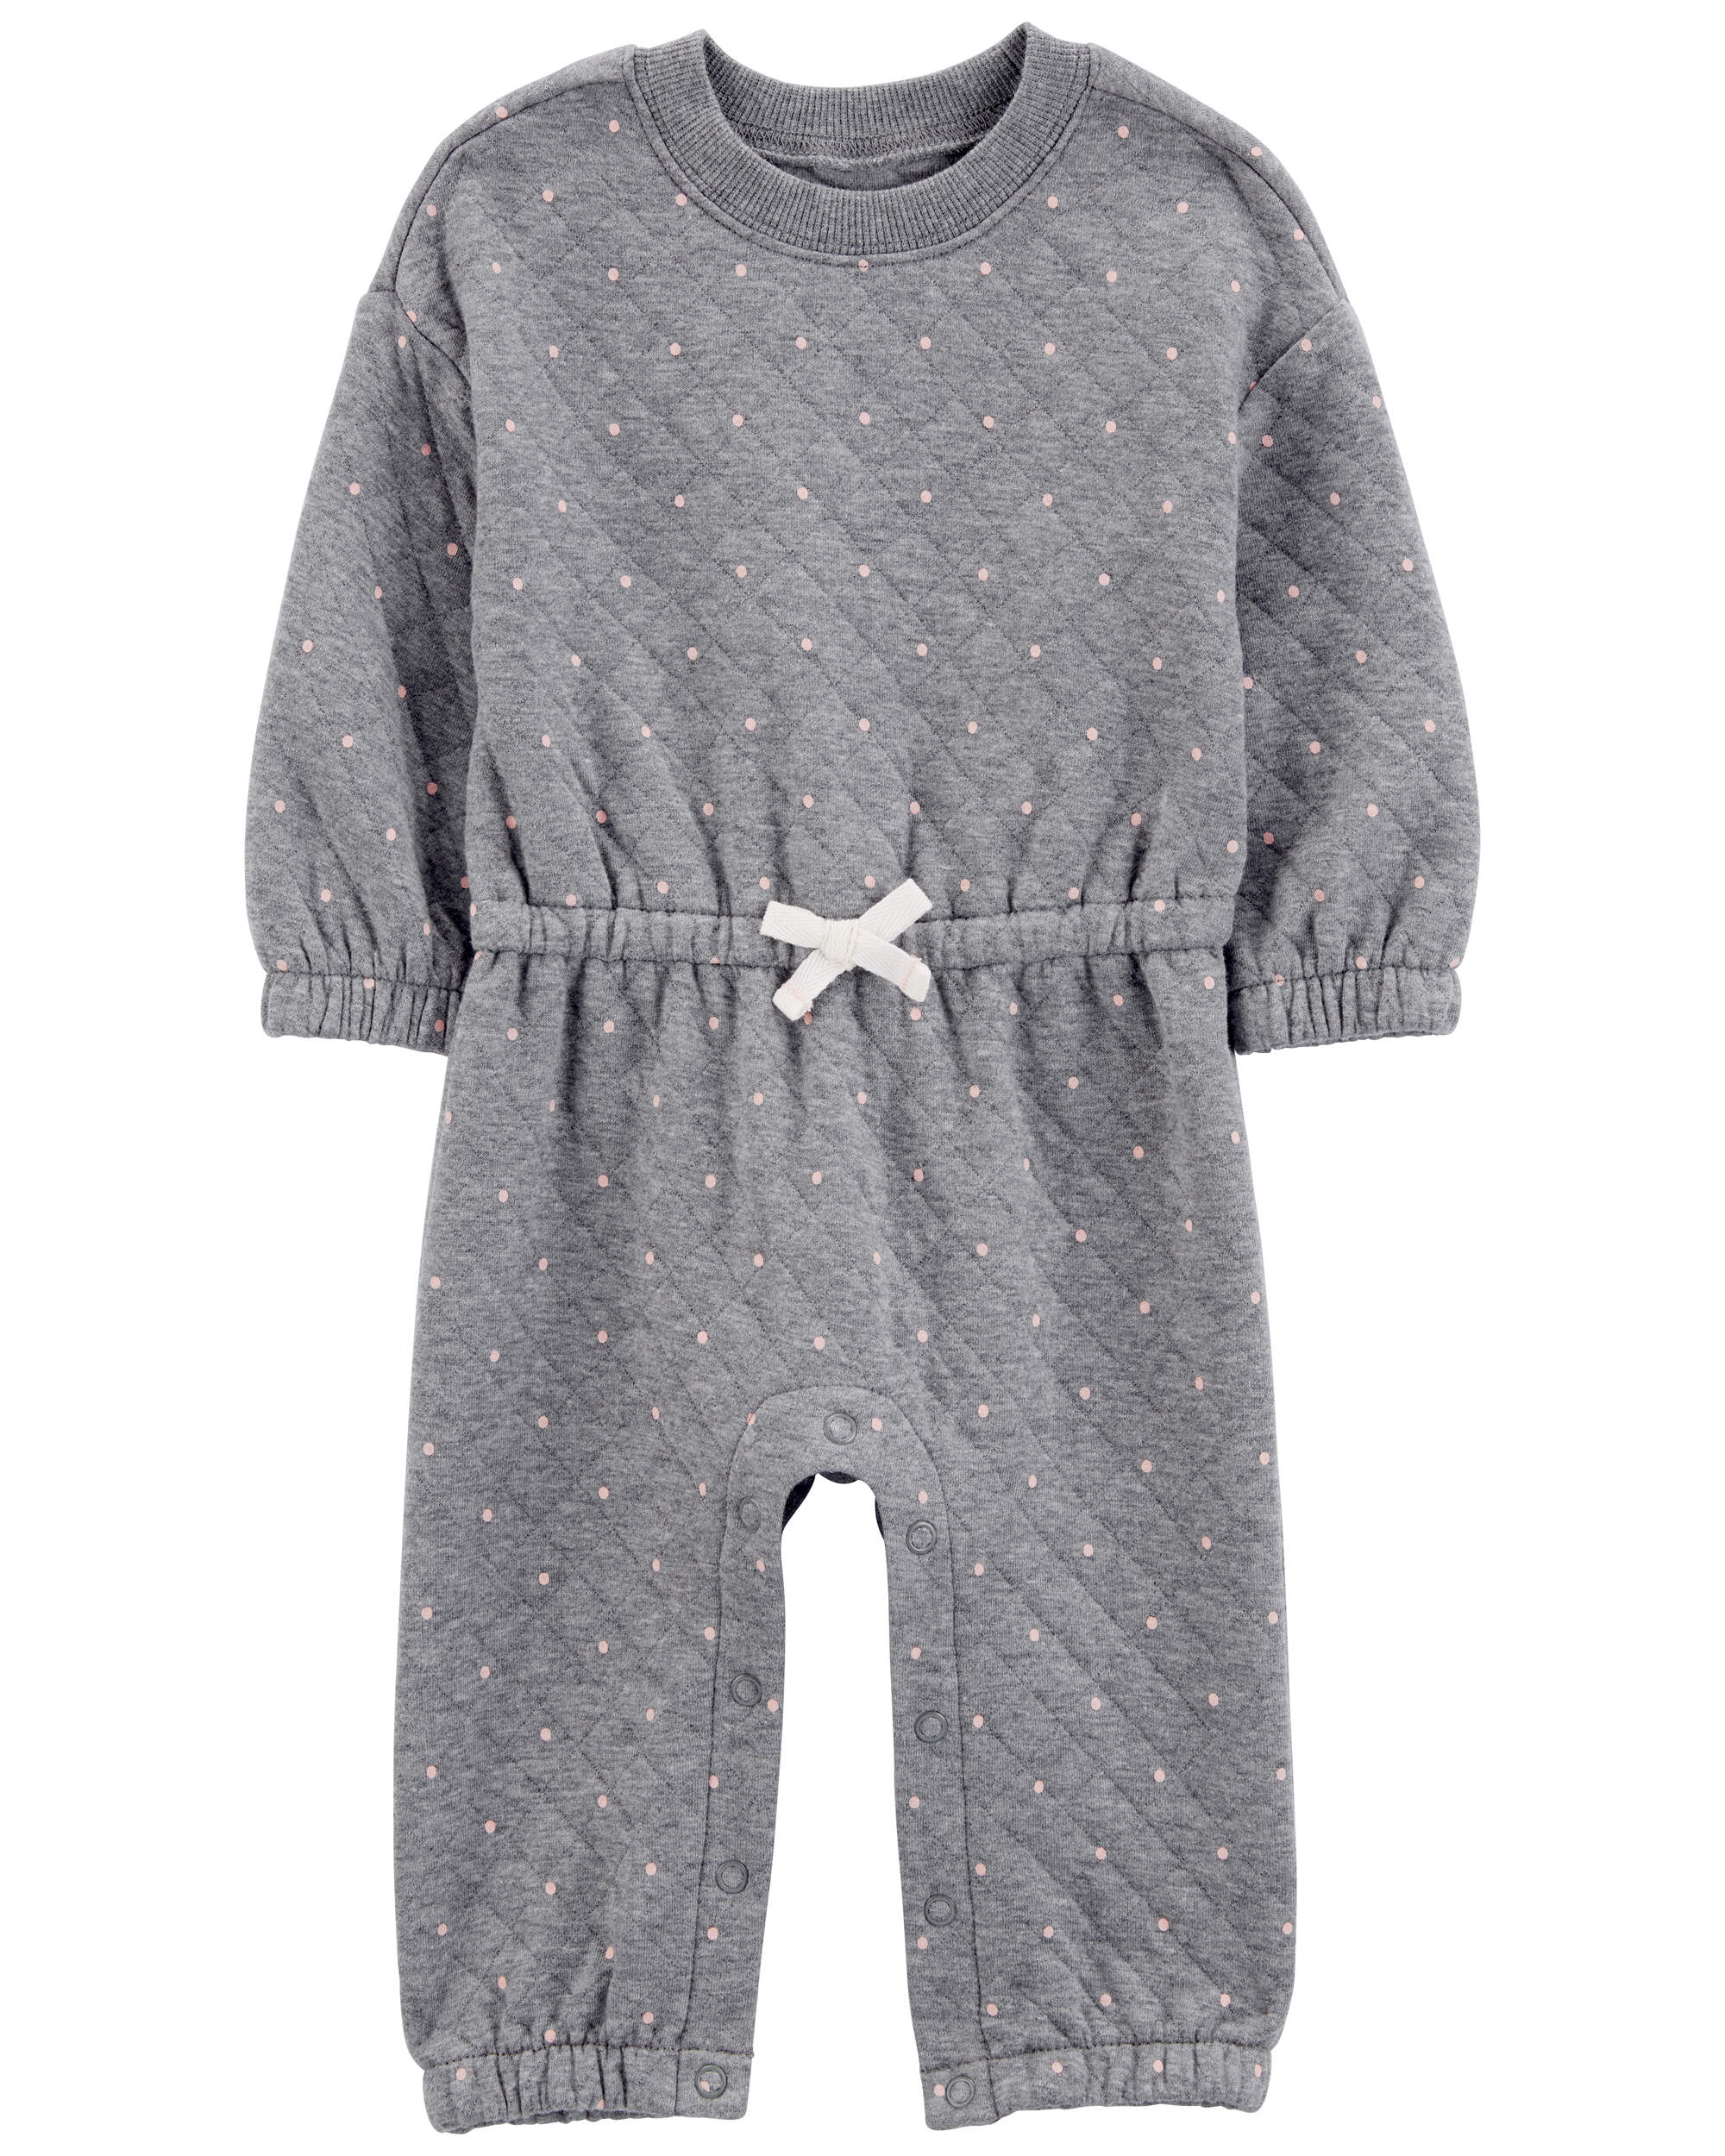 Baby Polka Dot Double-Knit Jumpsuit